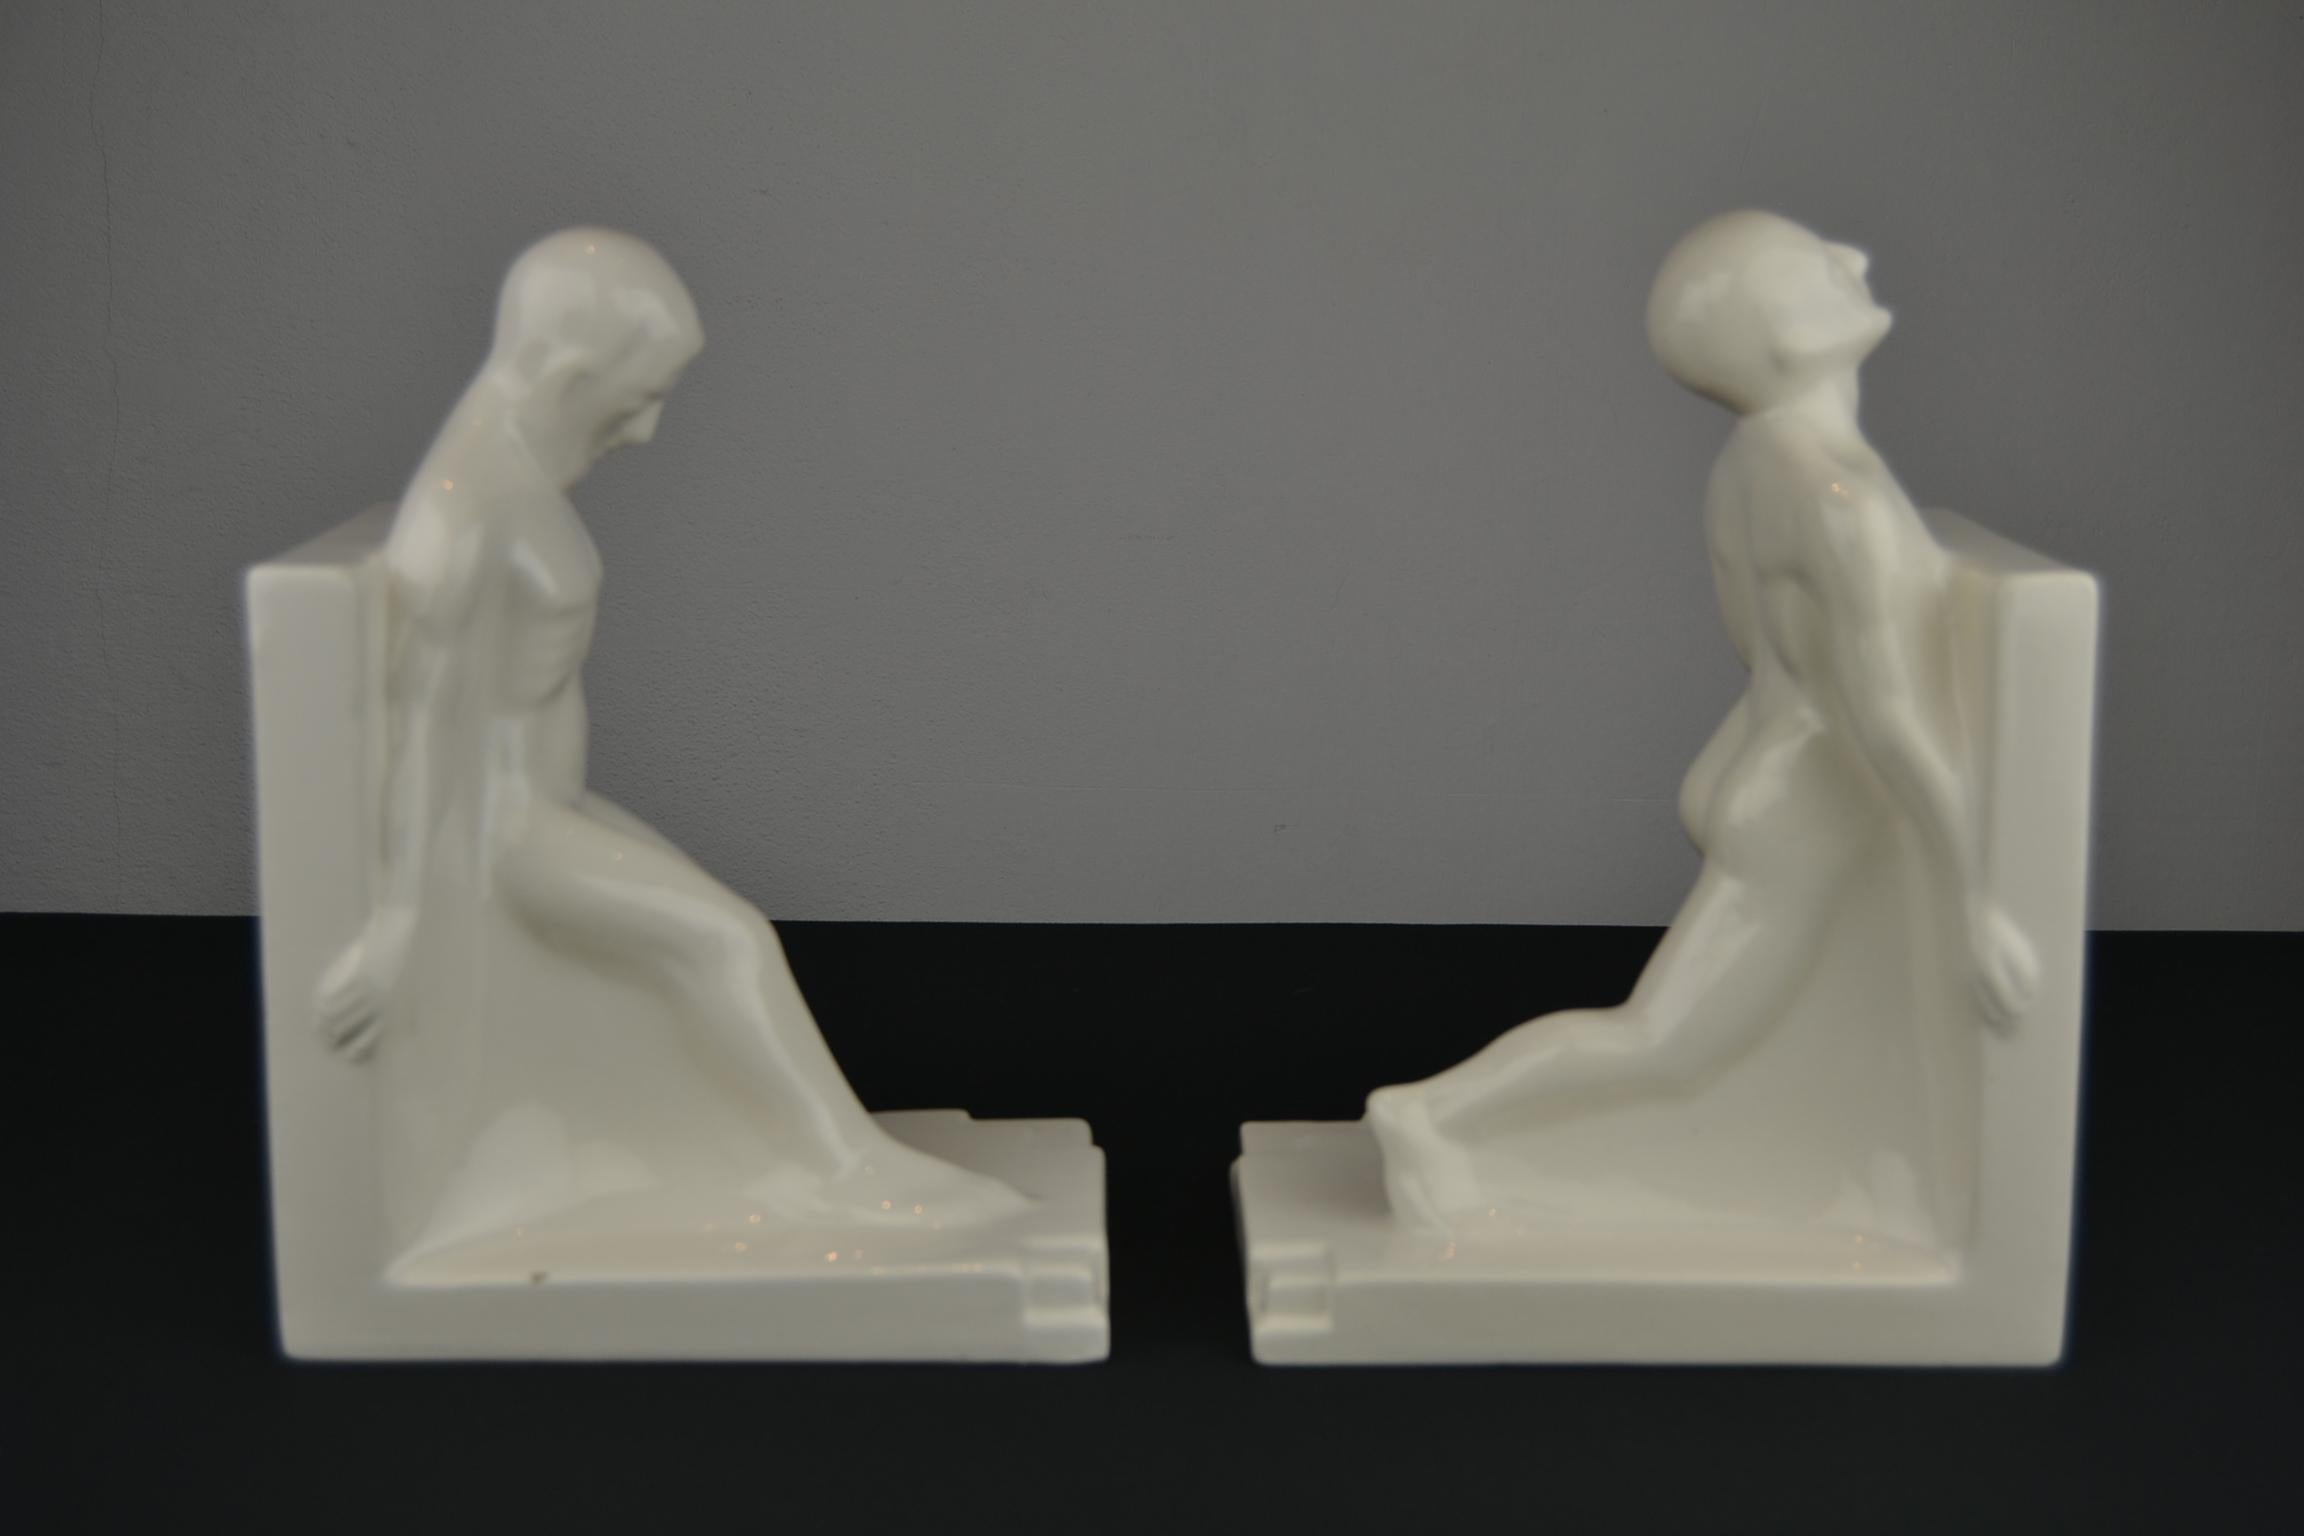 Large Art Deco Bookends with Nude Muscular Males in White Glazed Ceramic 12